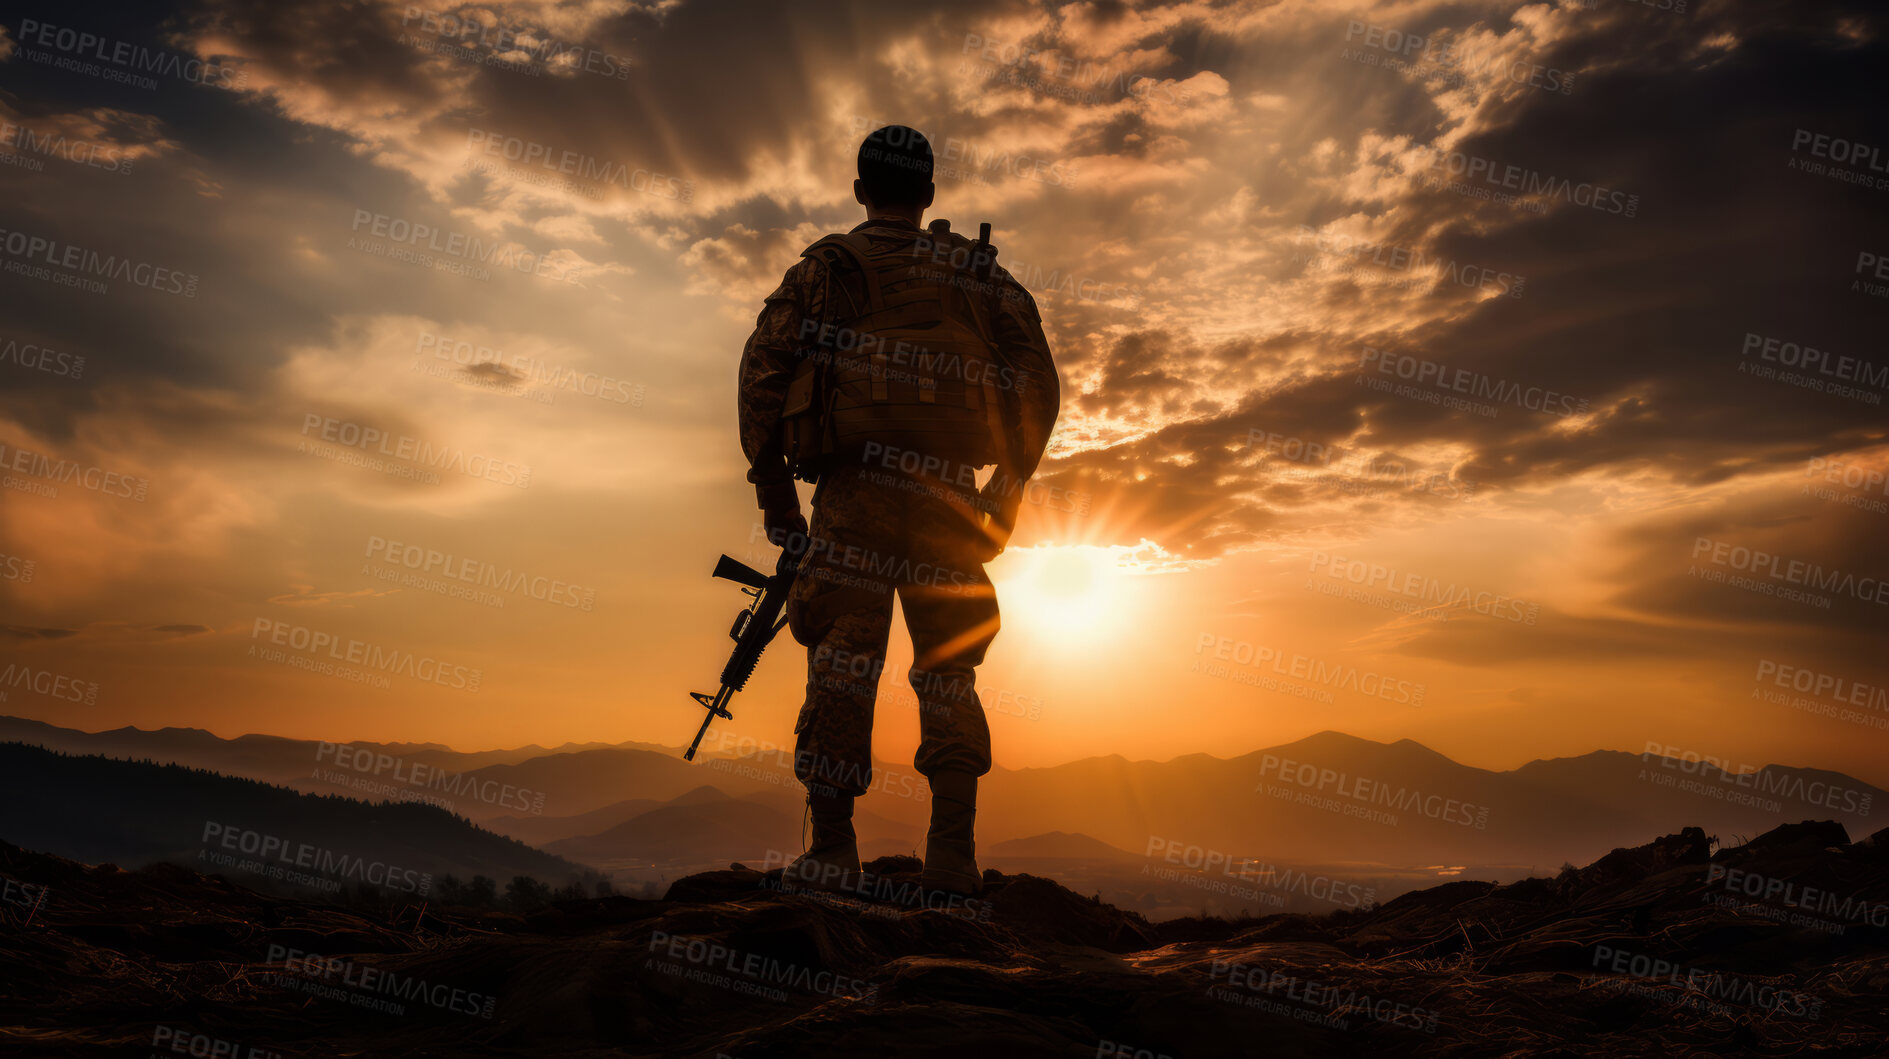 Buy stock photo Graphic silhouette of armed soldier or marine at sunset.
War concept.